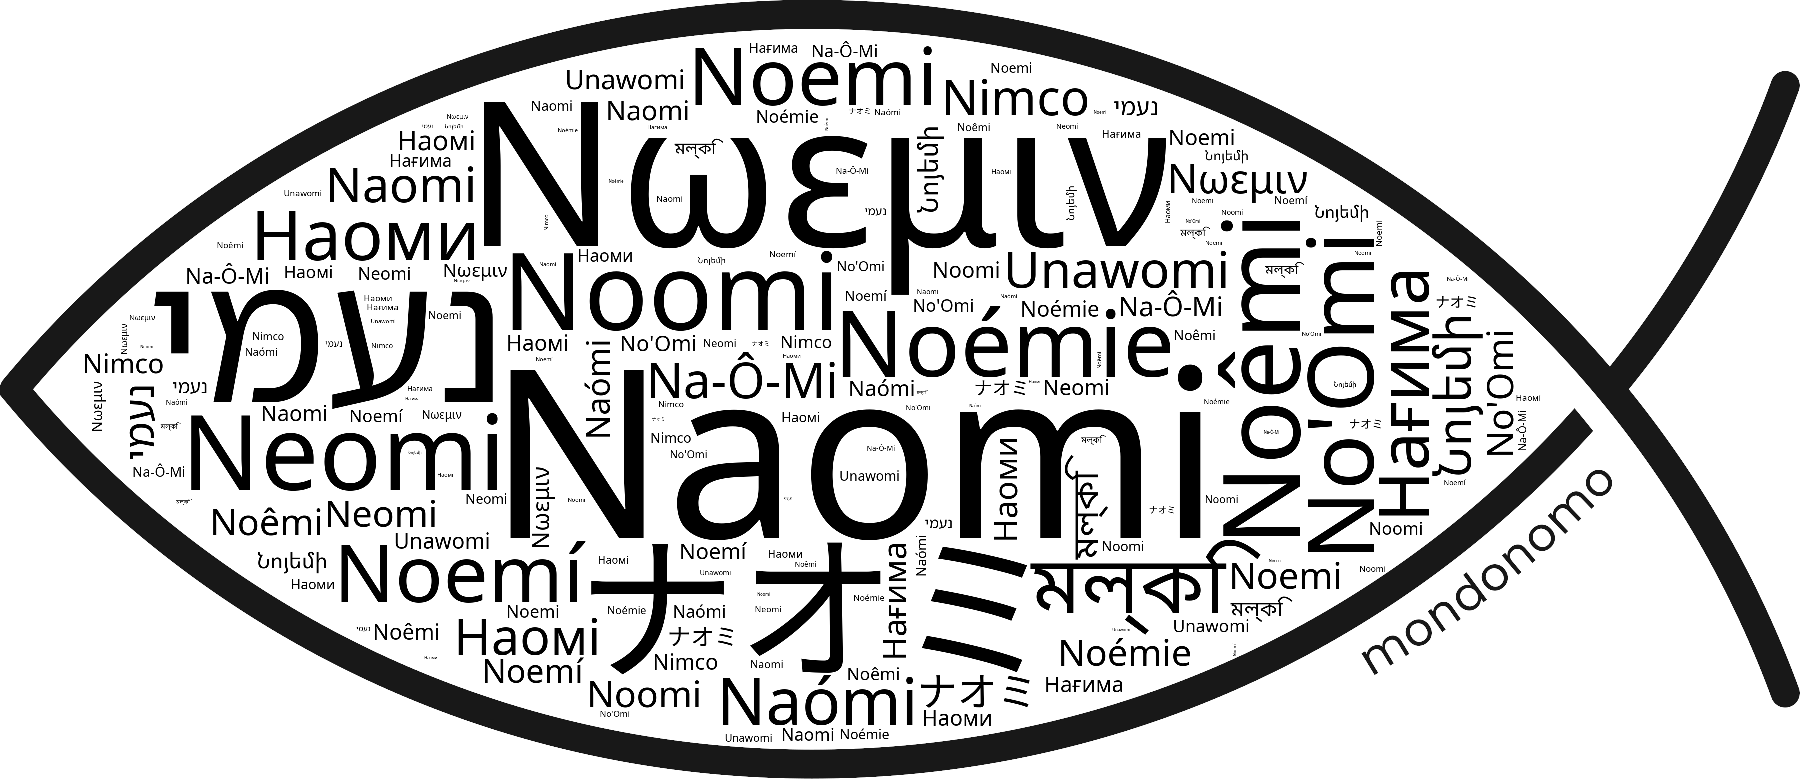 Name Naomi in the world's Bibles